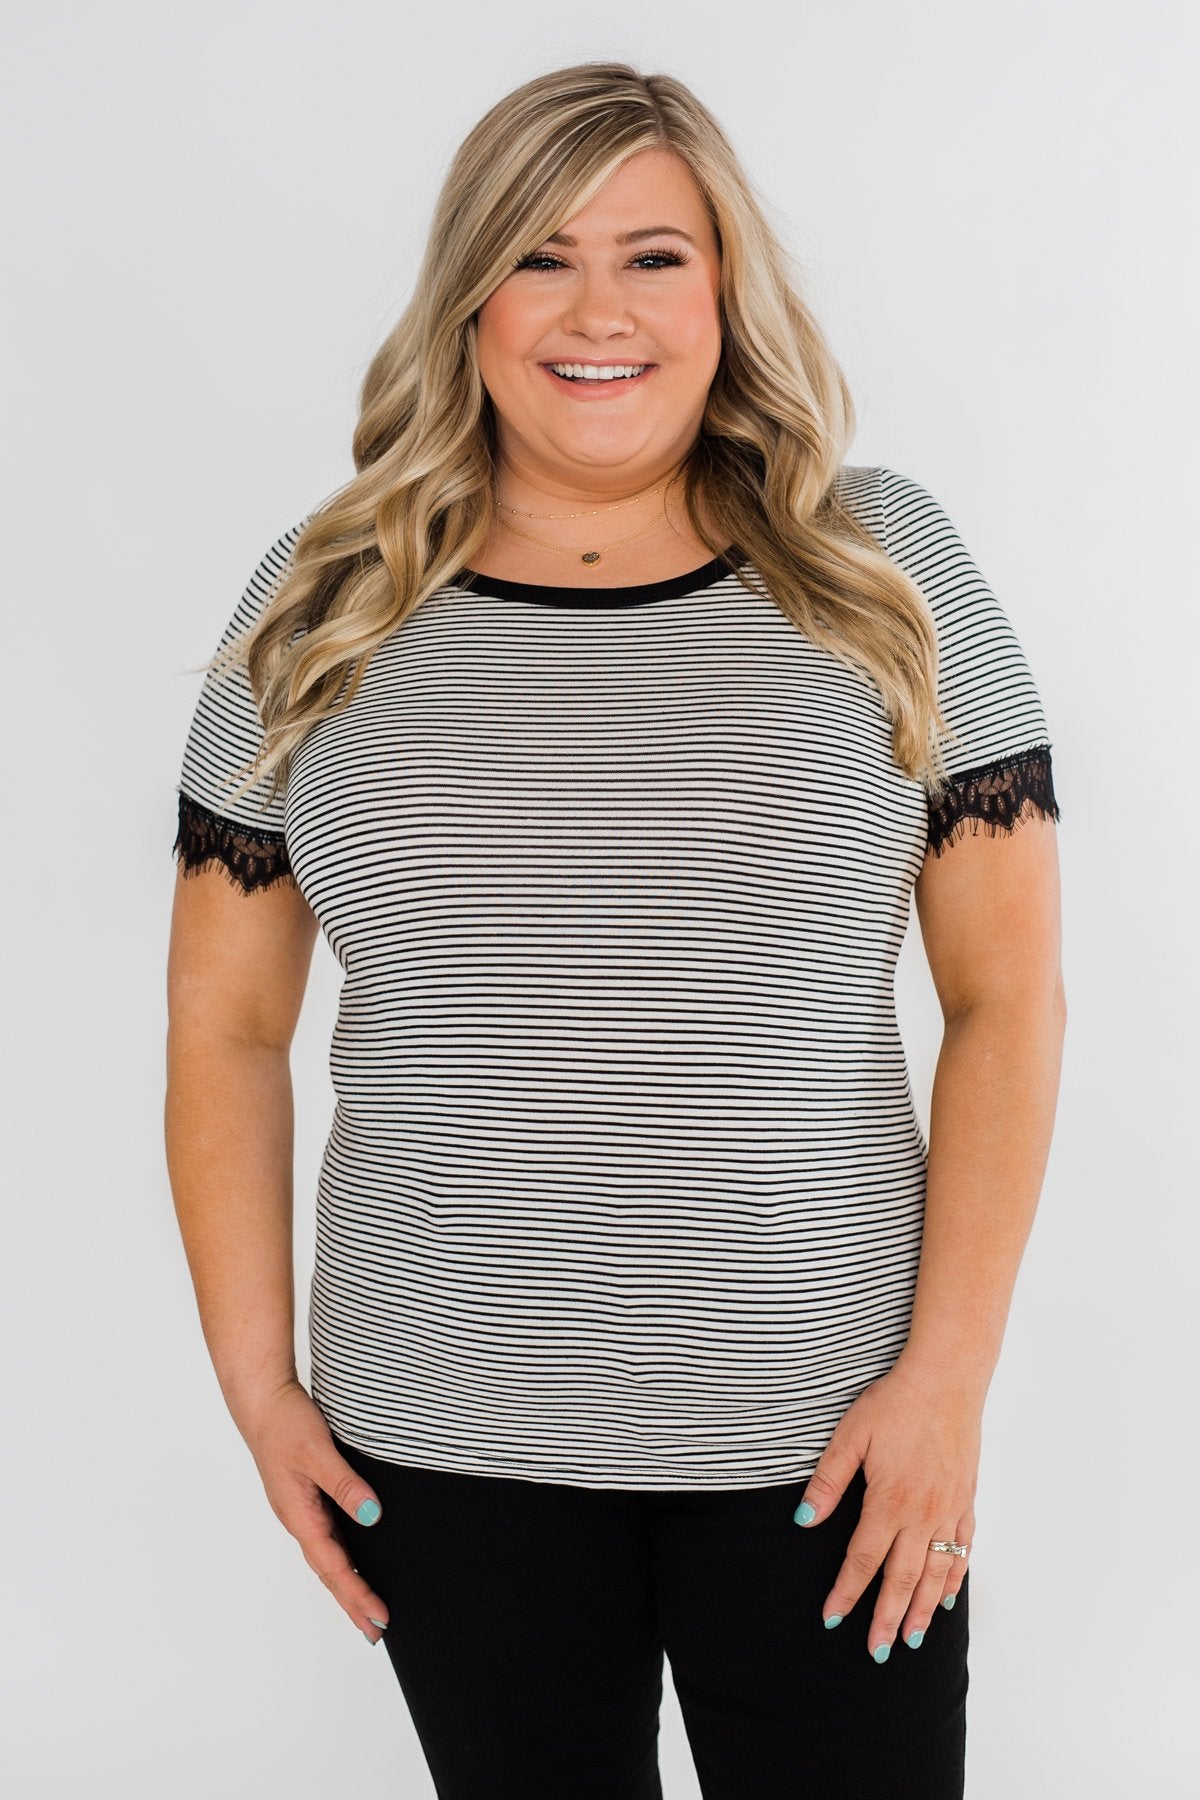 All About the Accents Black & White Striped Top